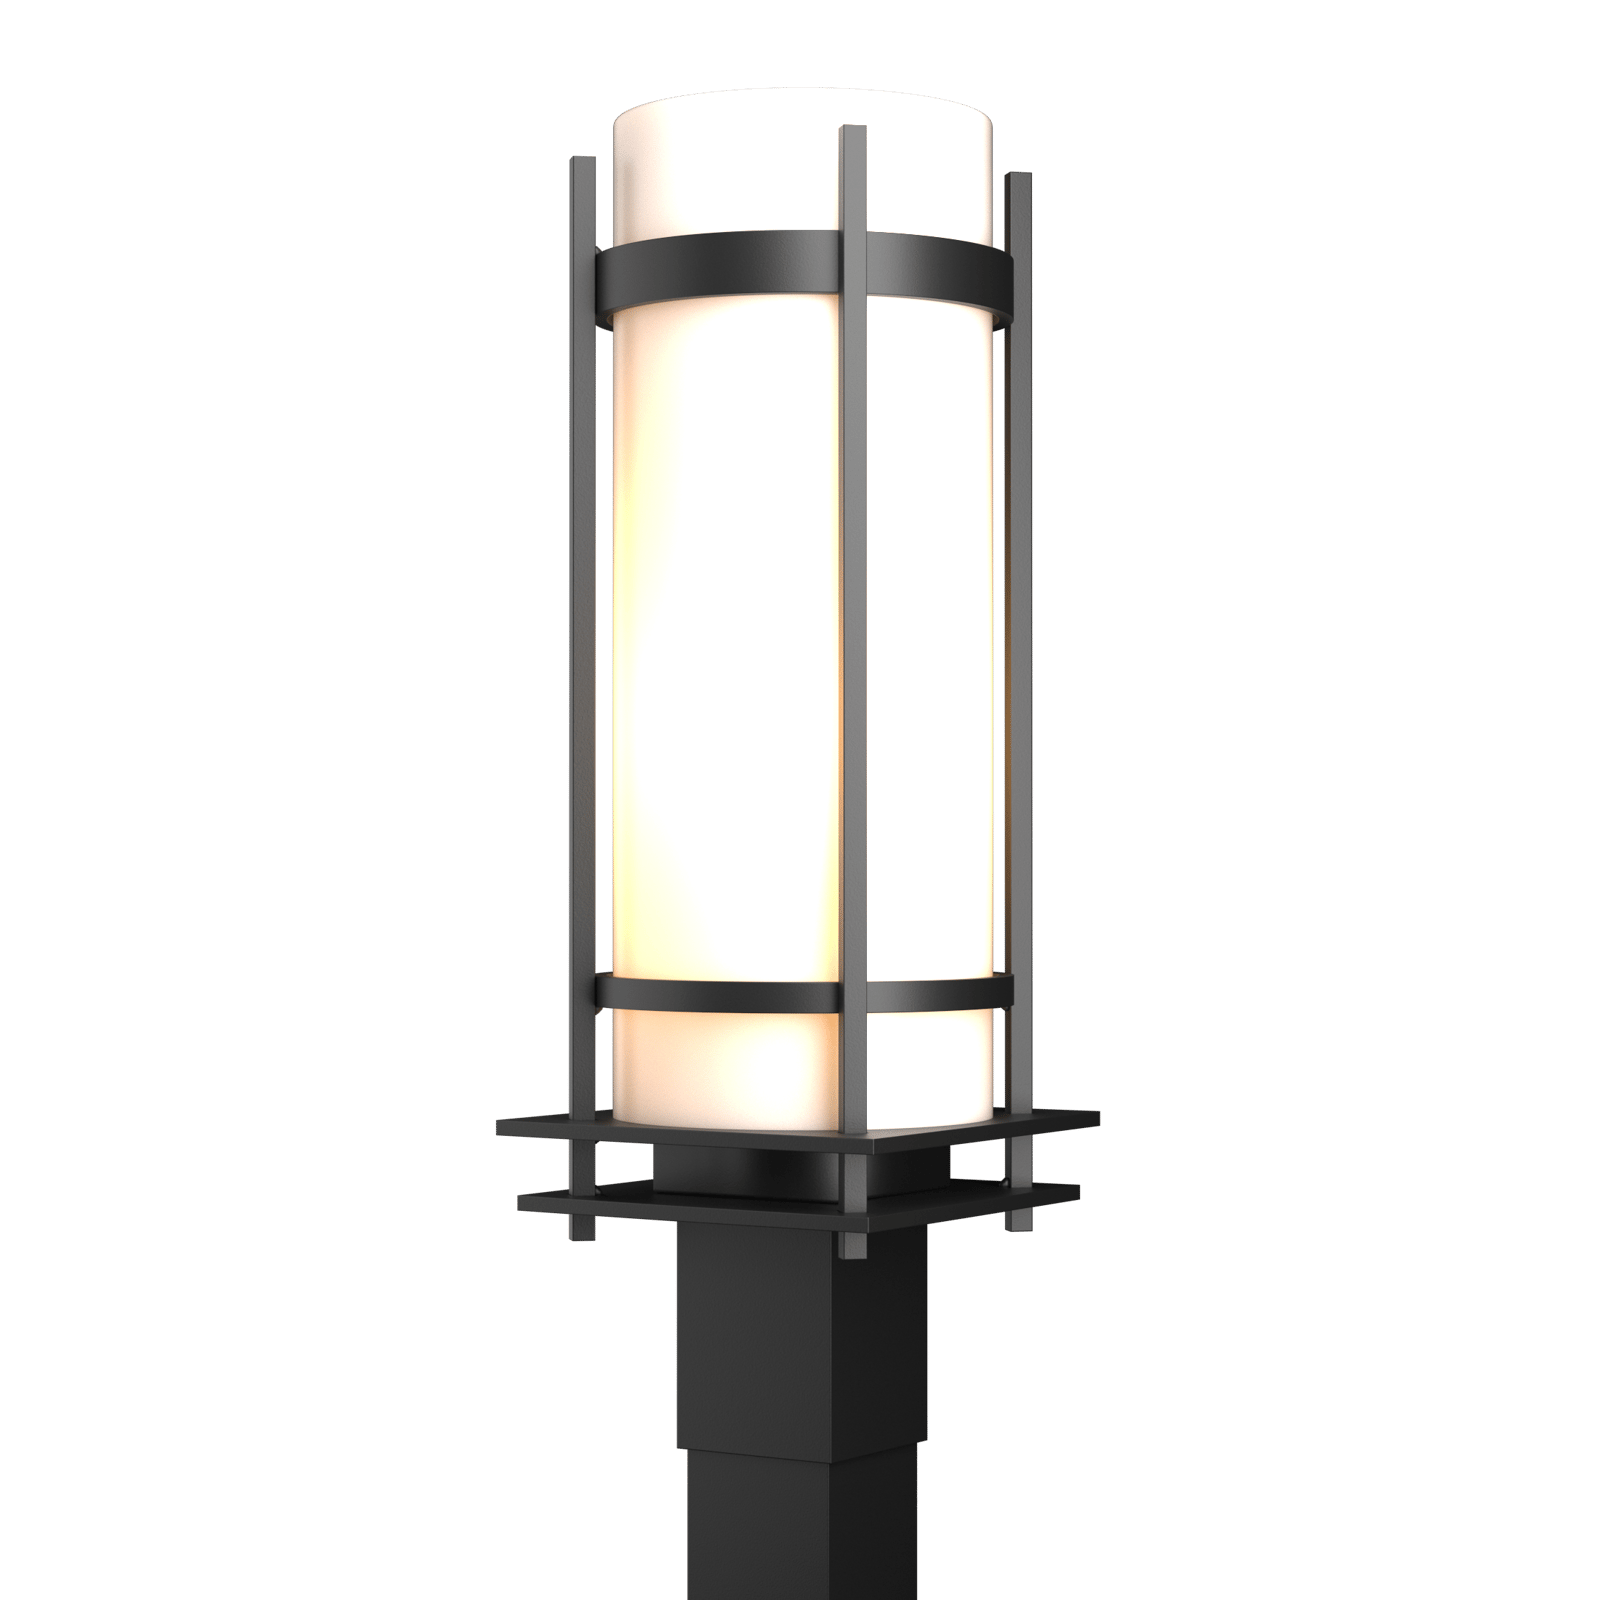 Hubbardton Forge Banded Outdoor Post Light Outdoor l Post/Pier Mounts Hubbardton Forge Coastal Black Opal Glass (GG) 